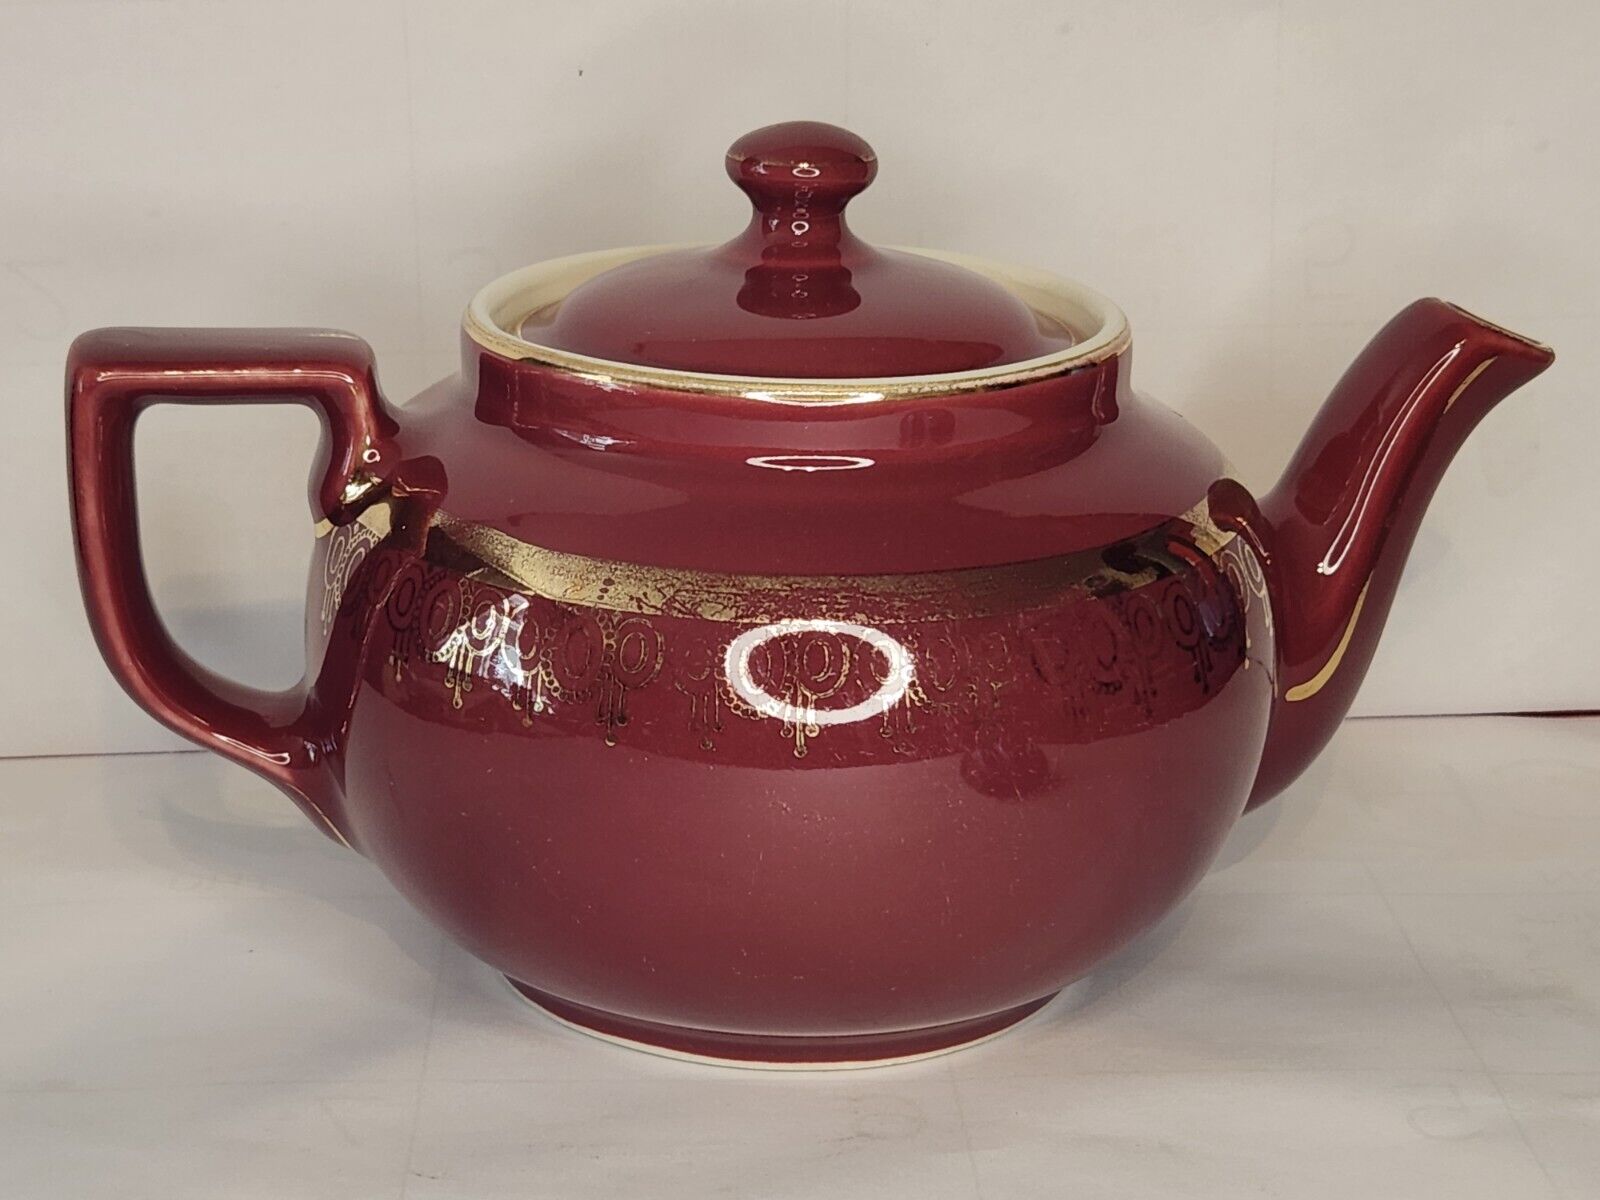 Vintage HALL 6 Cup Burgandy and Gold Trimmed Teapot, #013, Made in U.S.A.